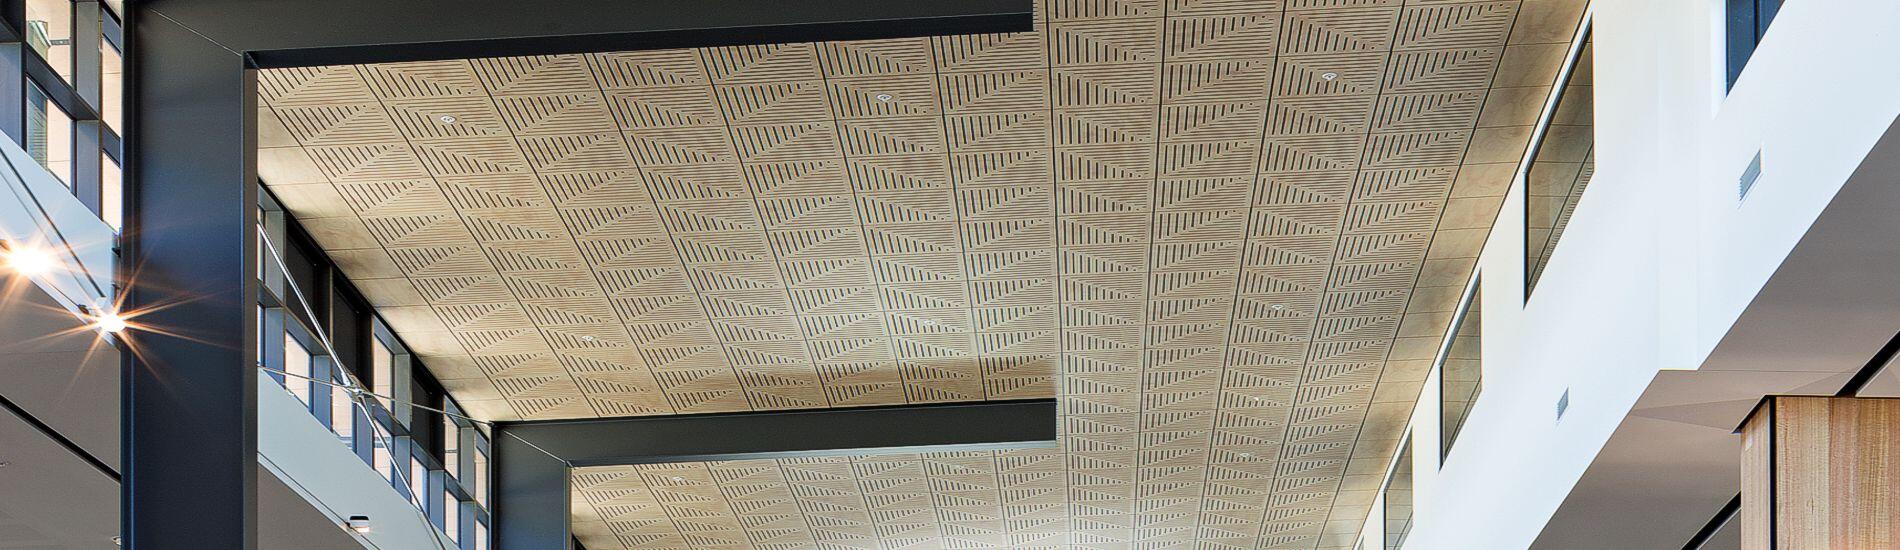 SUPATILE Acoustic Ceiling Tiles Meet BCA and Green Star Needs for Community Library